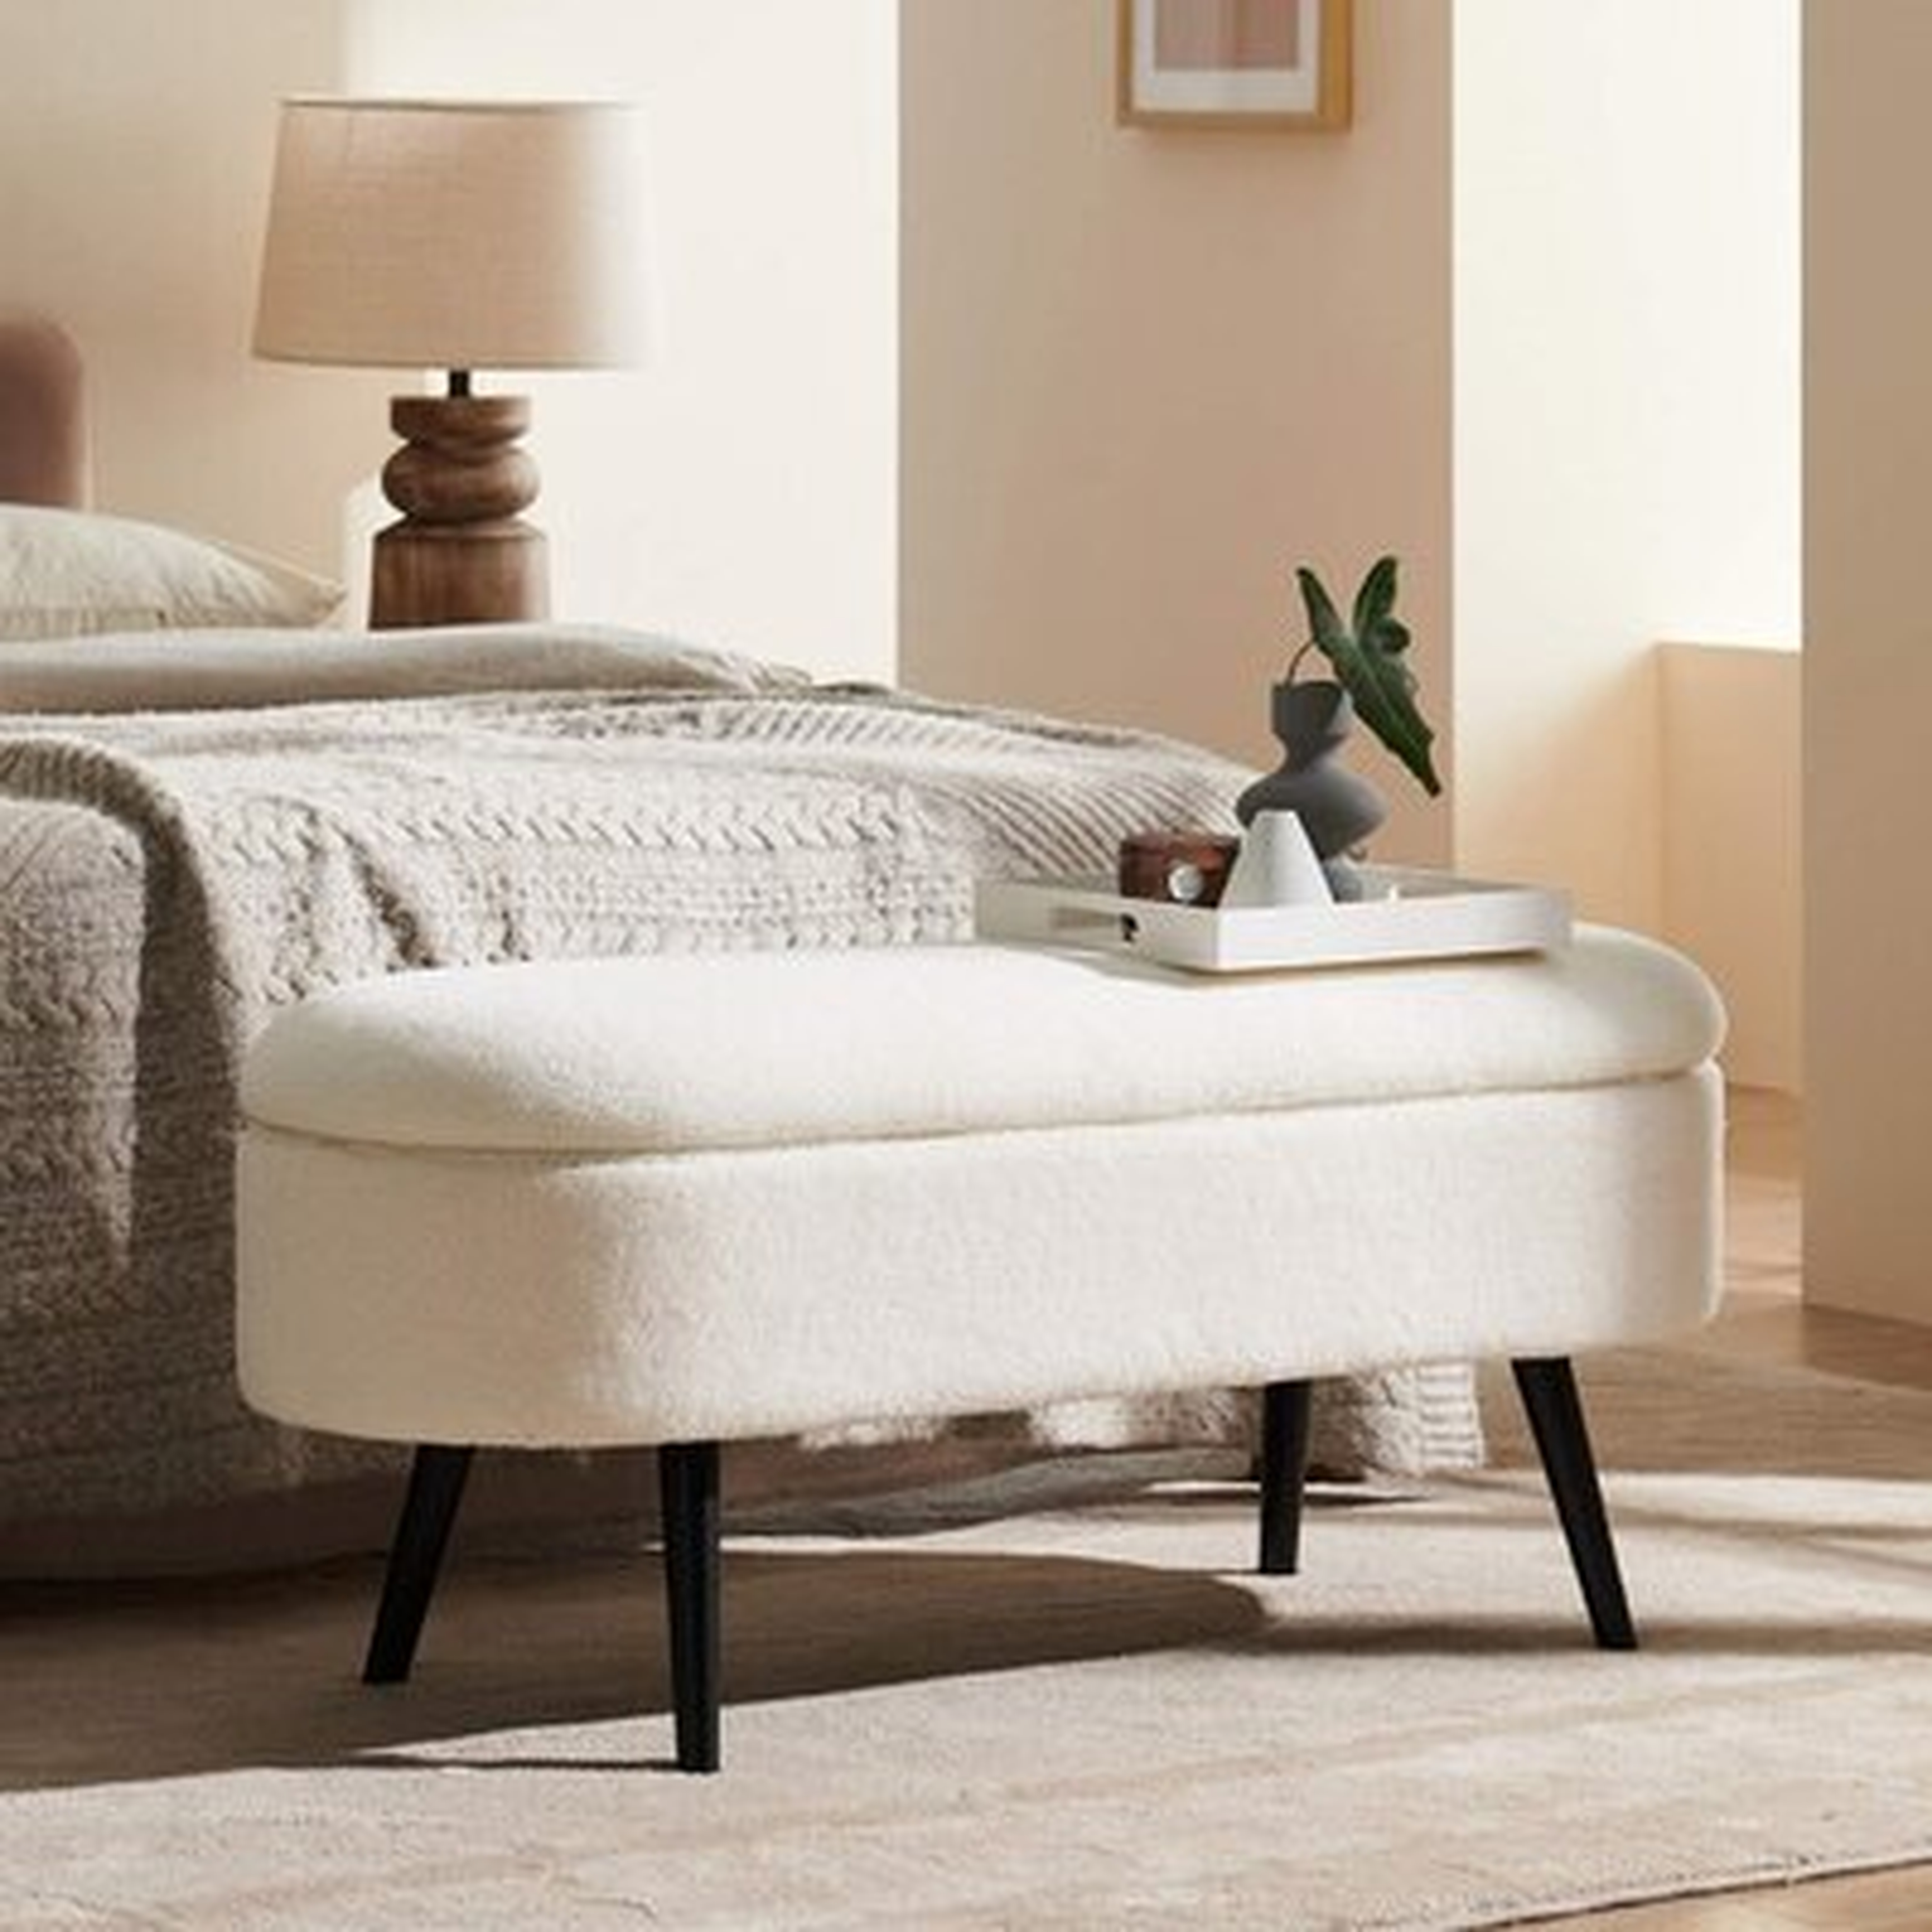 Sherpa Storage Bench For Bedroom - End Of Bed Bench Ottoman With Storage, Upholstered Bench With Solid Wood Legs For Living Room, Entryway - Wayfair